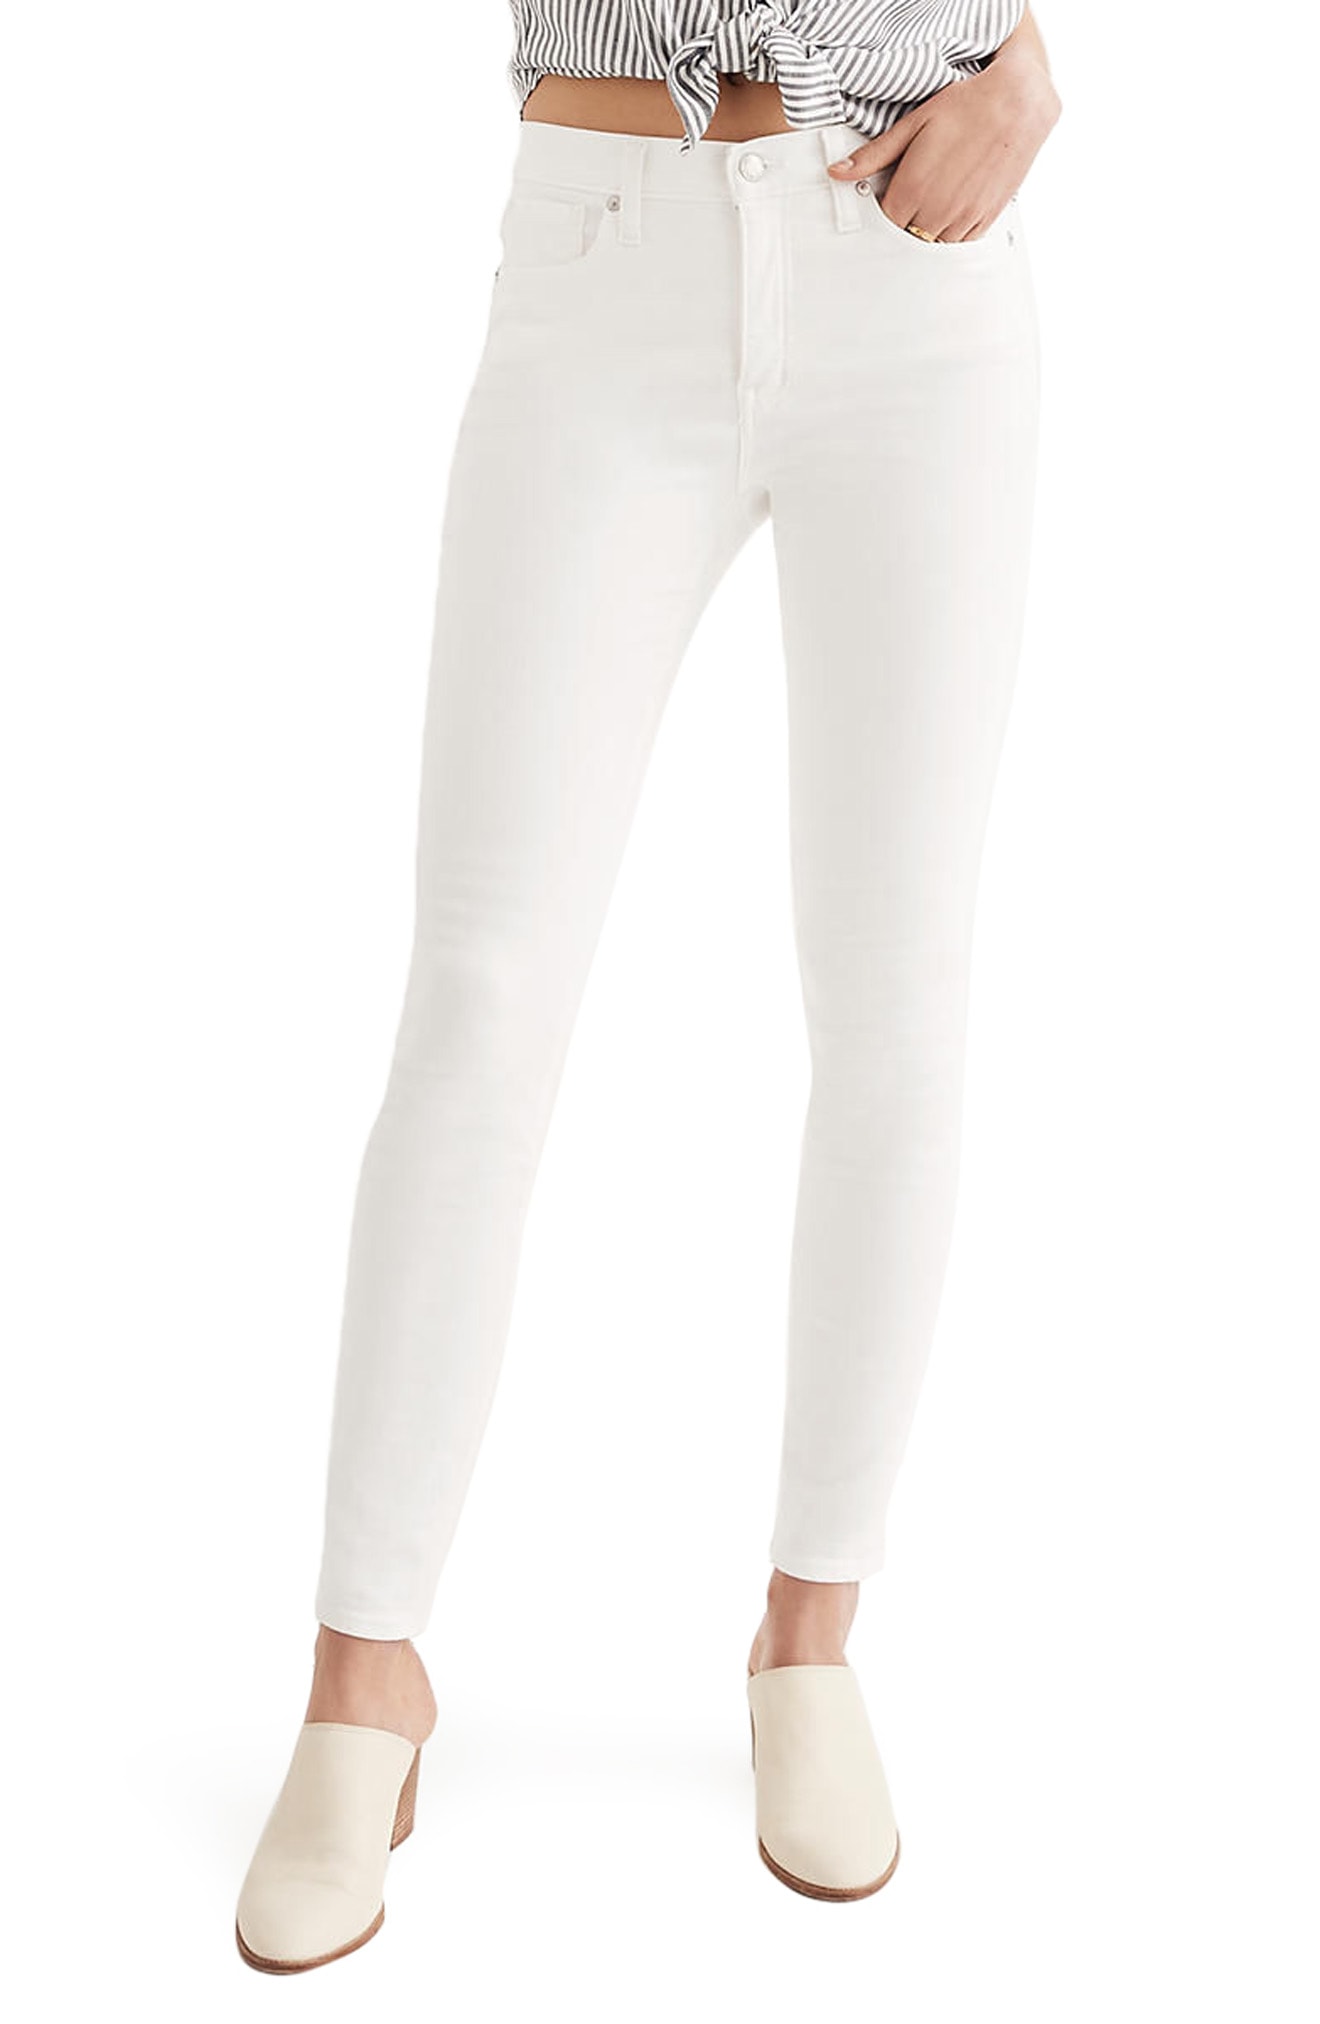 Make your unique style by wearing
white  skinny jeans